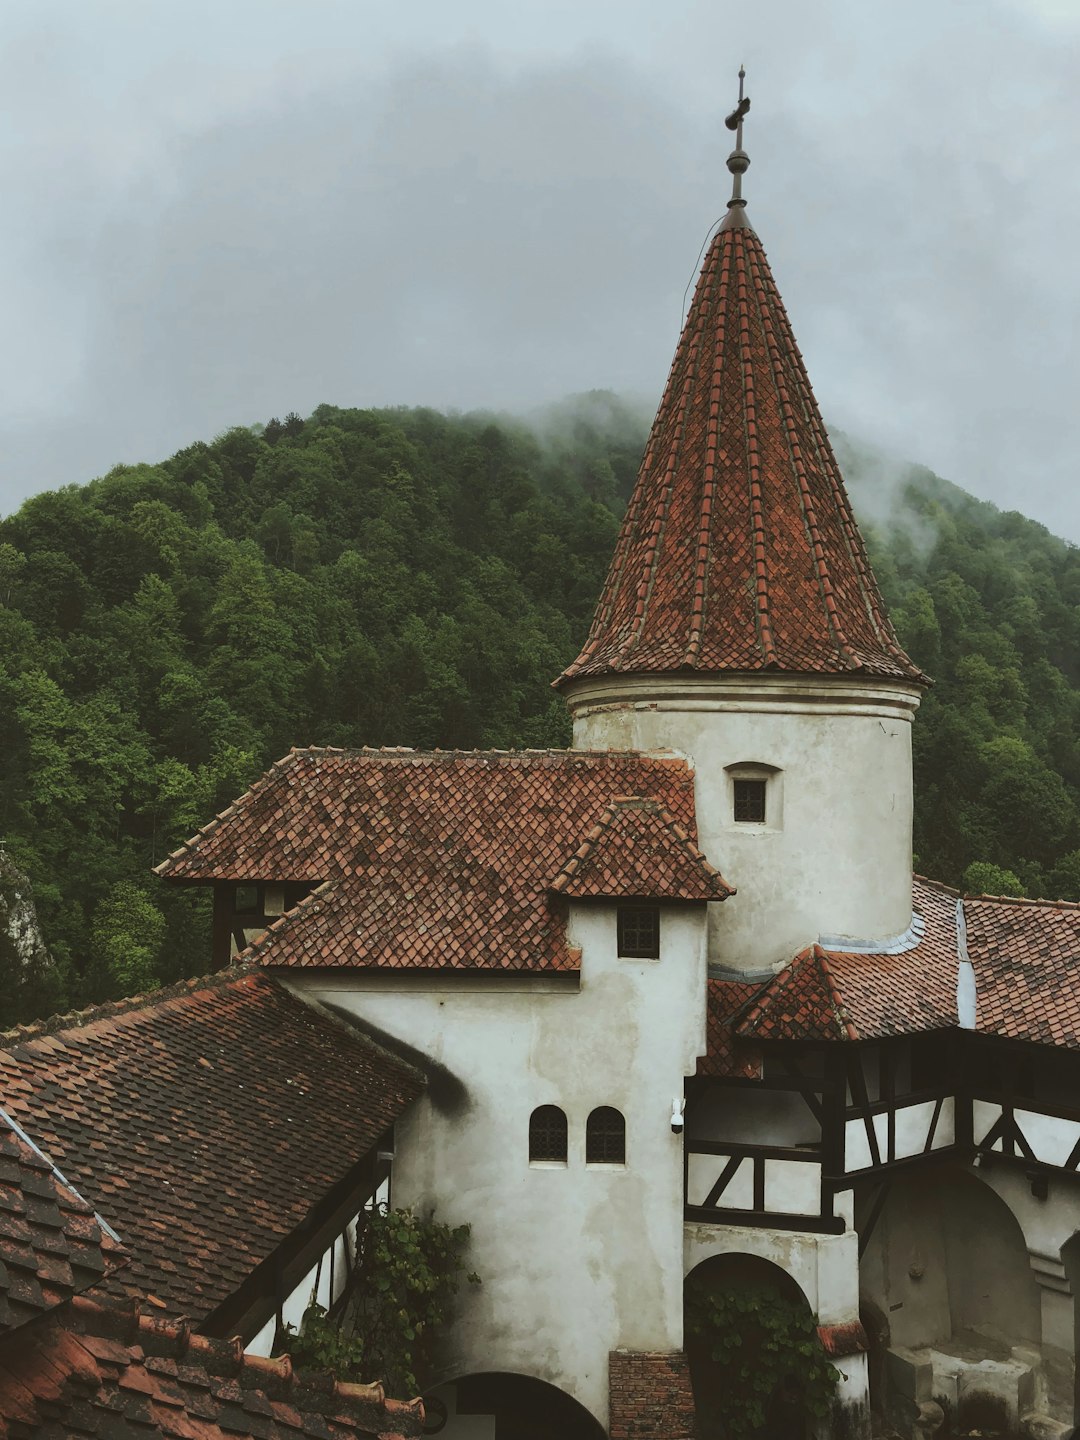 Travel Tips and Stories of Bran Castle in Romania